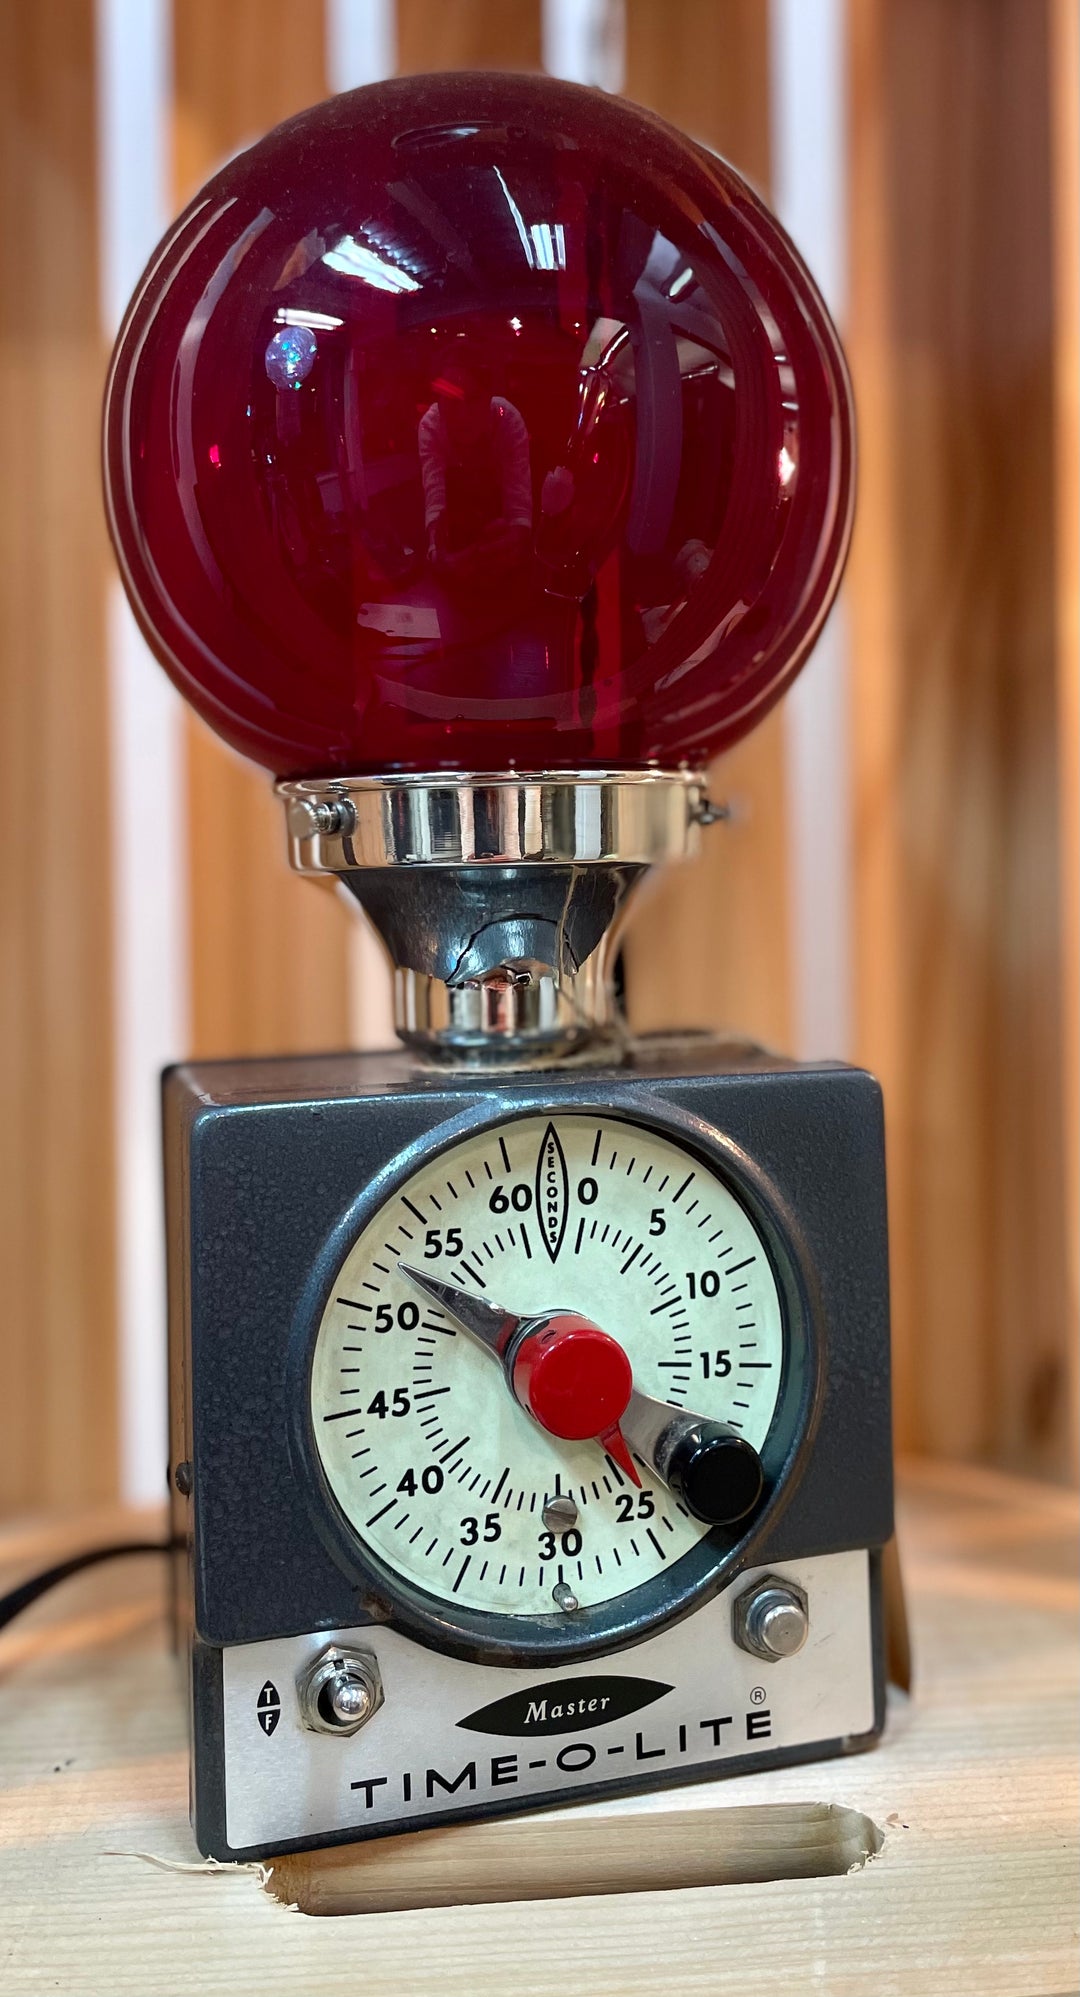 MASTER DARKROOM TIMER LAMP - E26 BULB AND RED GLASS SHADE INCLUDED